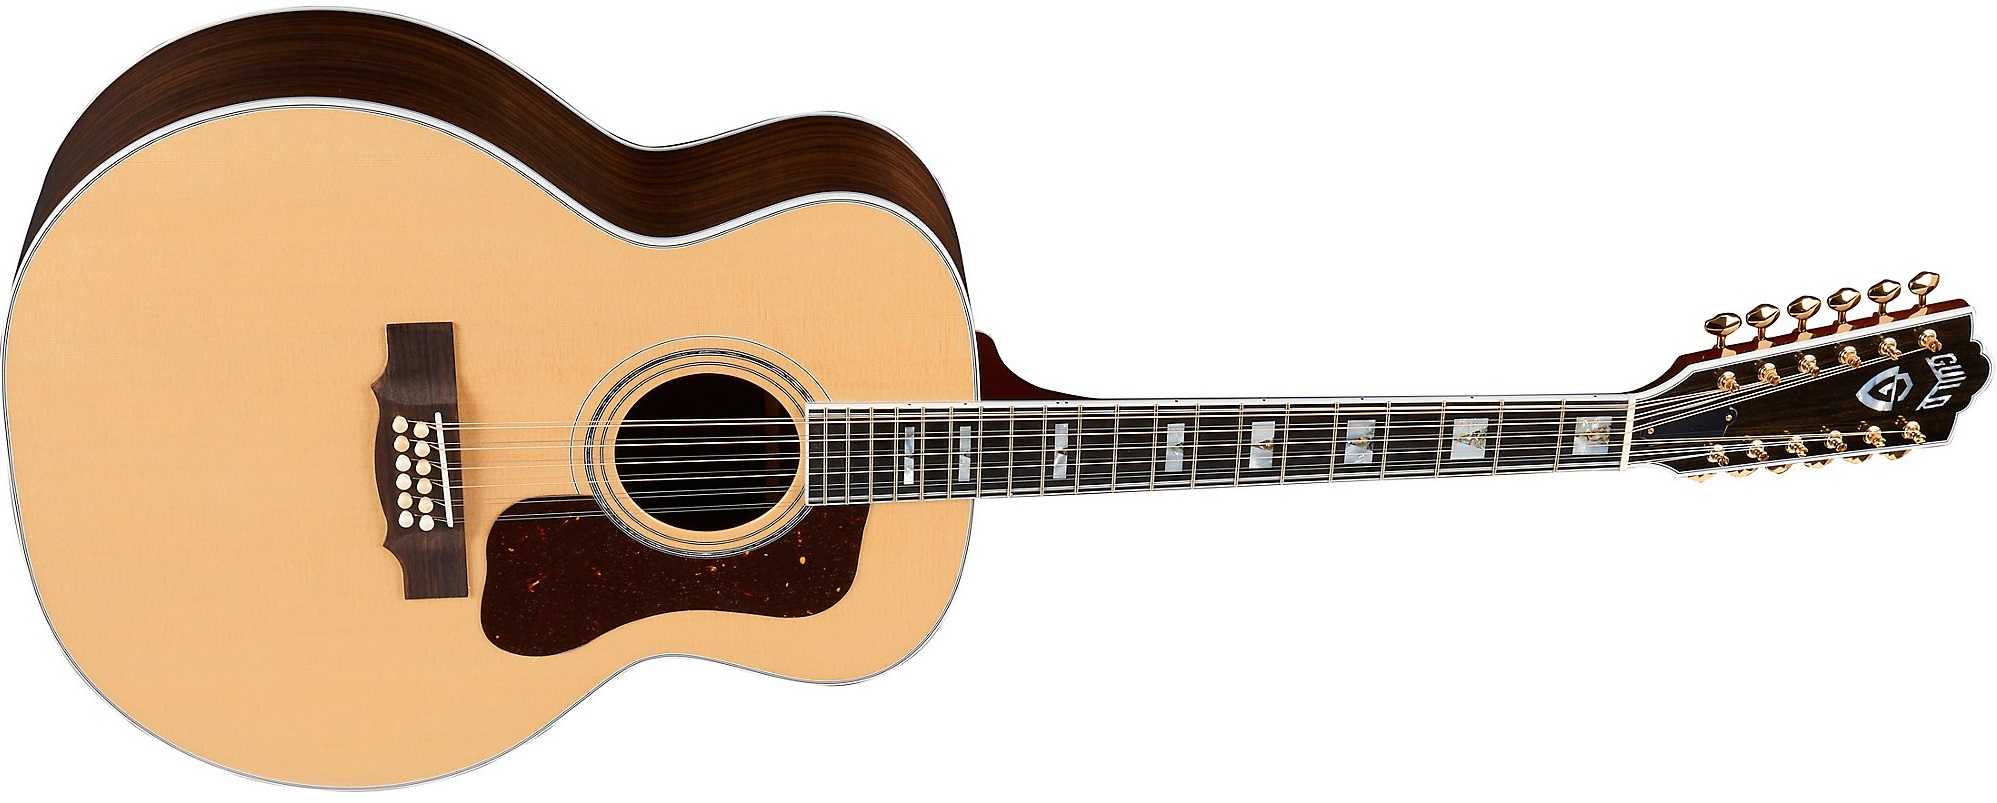 Guild F-512 Acoustic Guitar on a white background